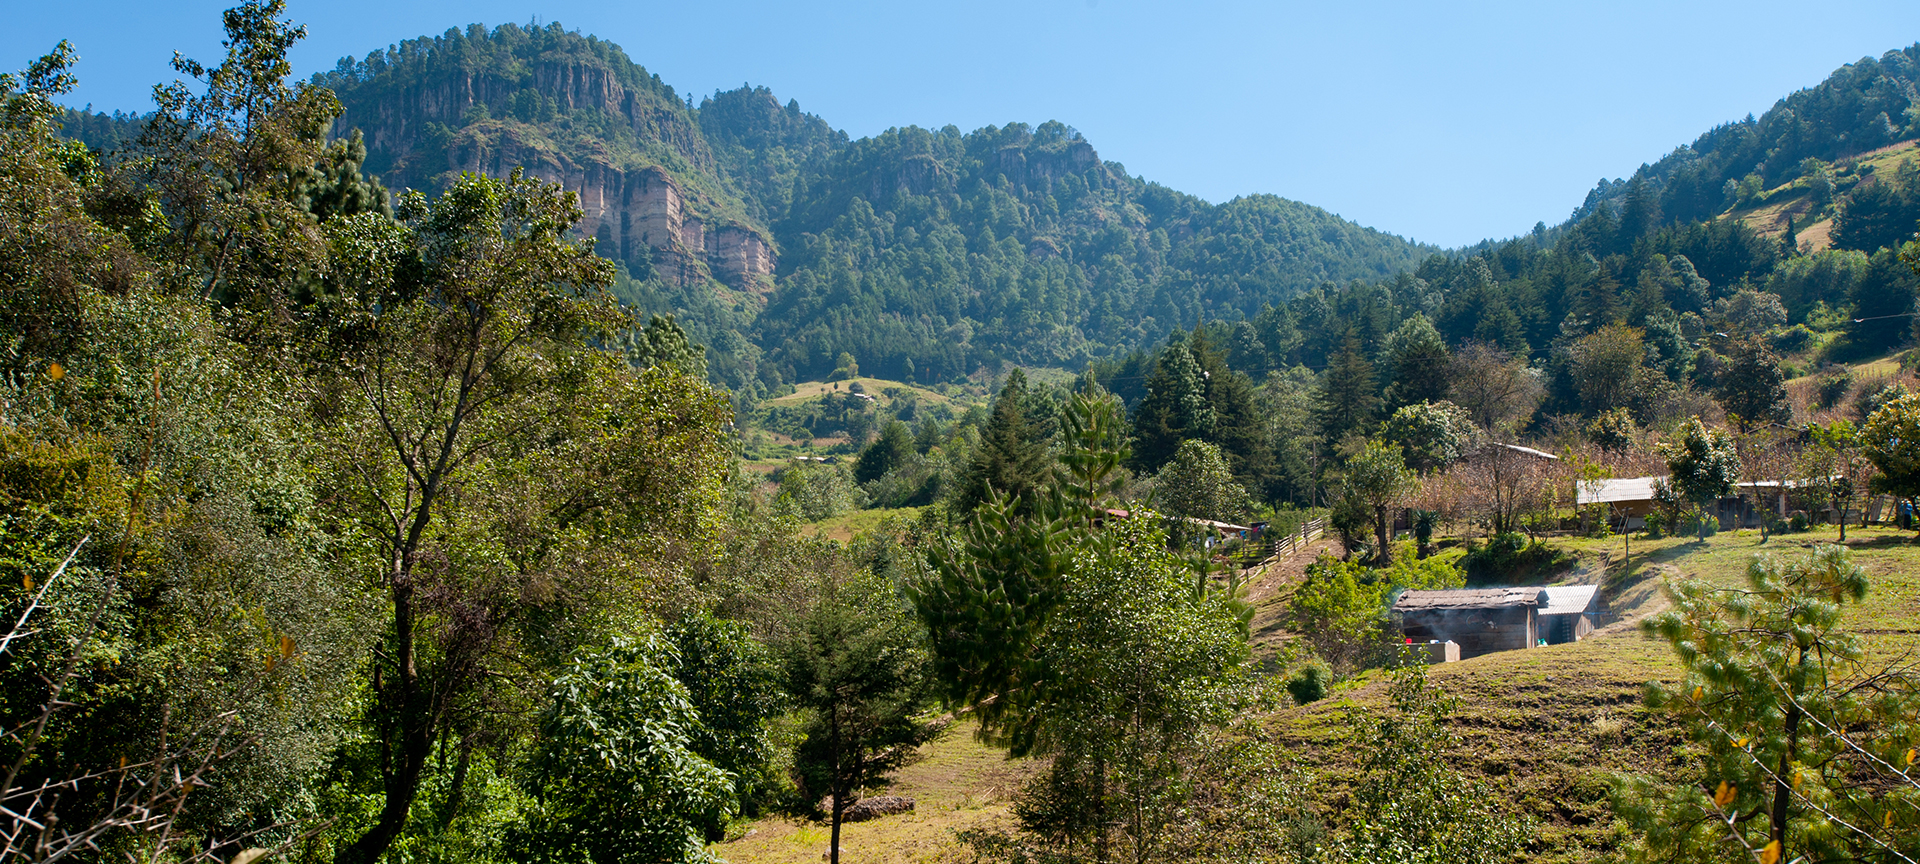 Green forest and hills surrounding a few small homes. In the background are mountains and bright blue skies. 